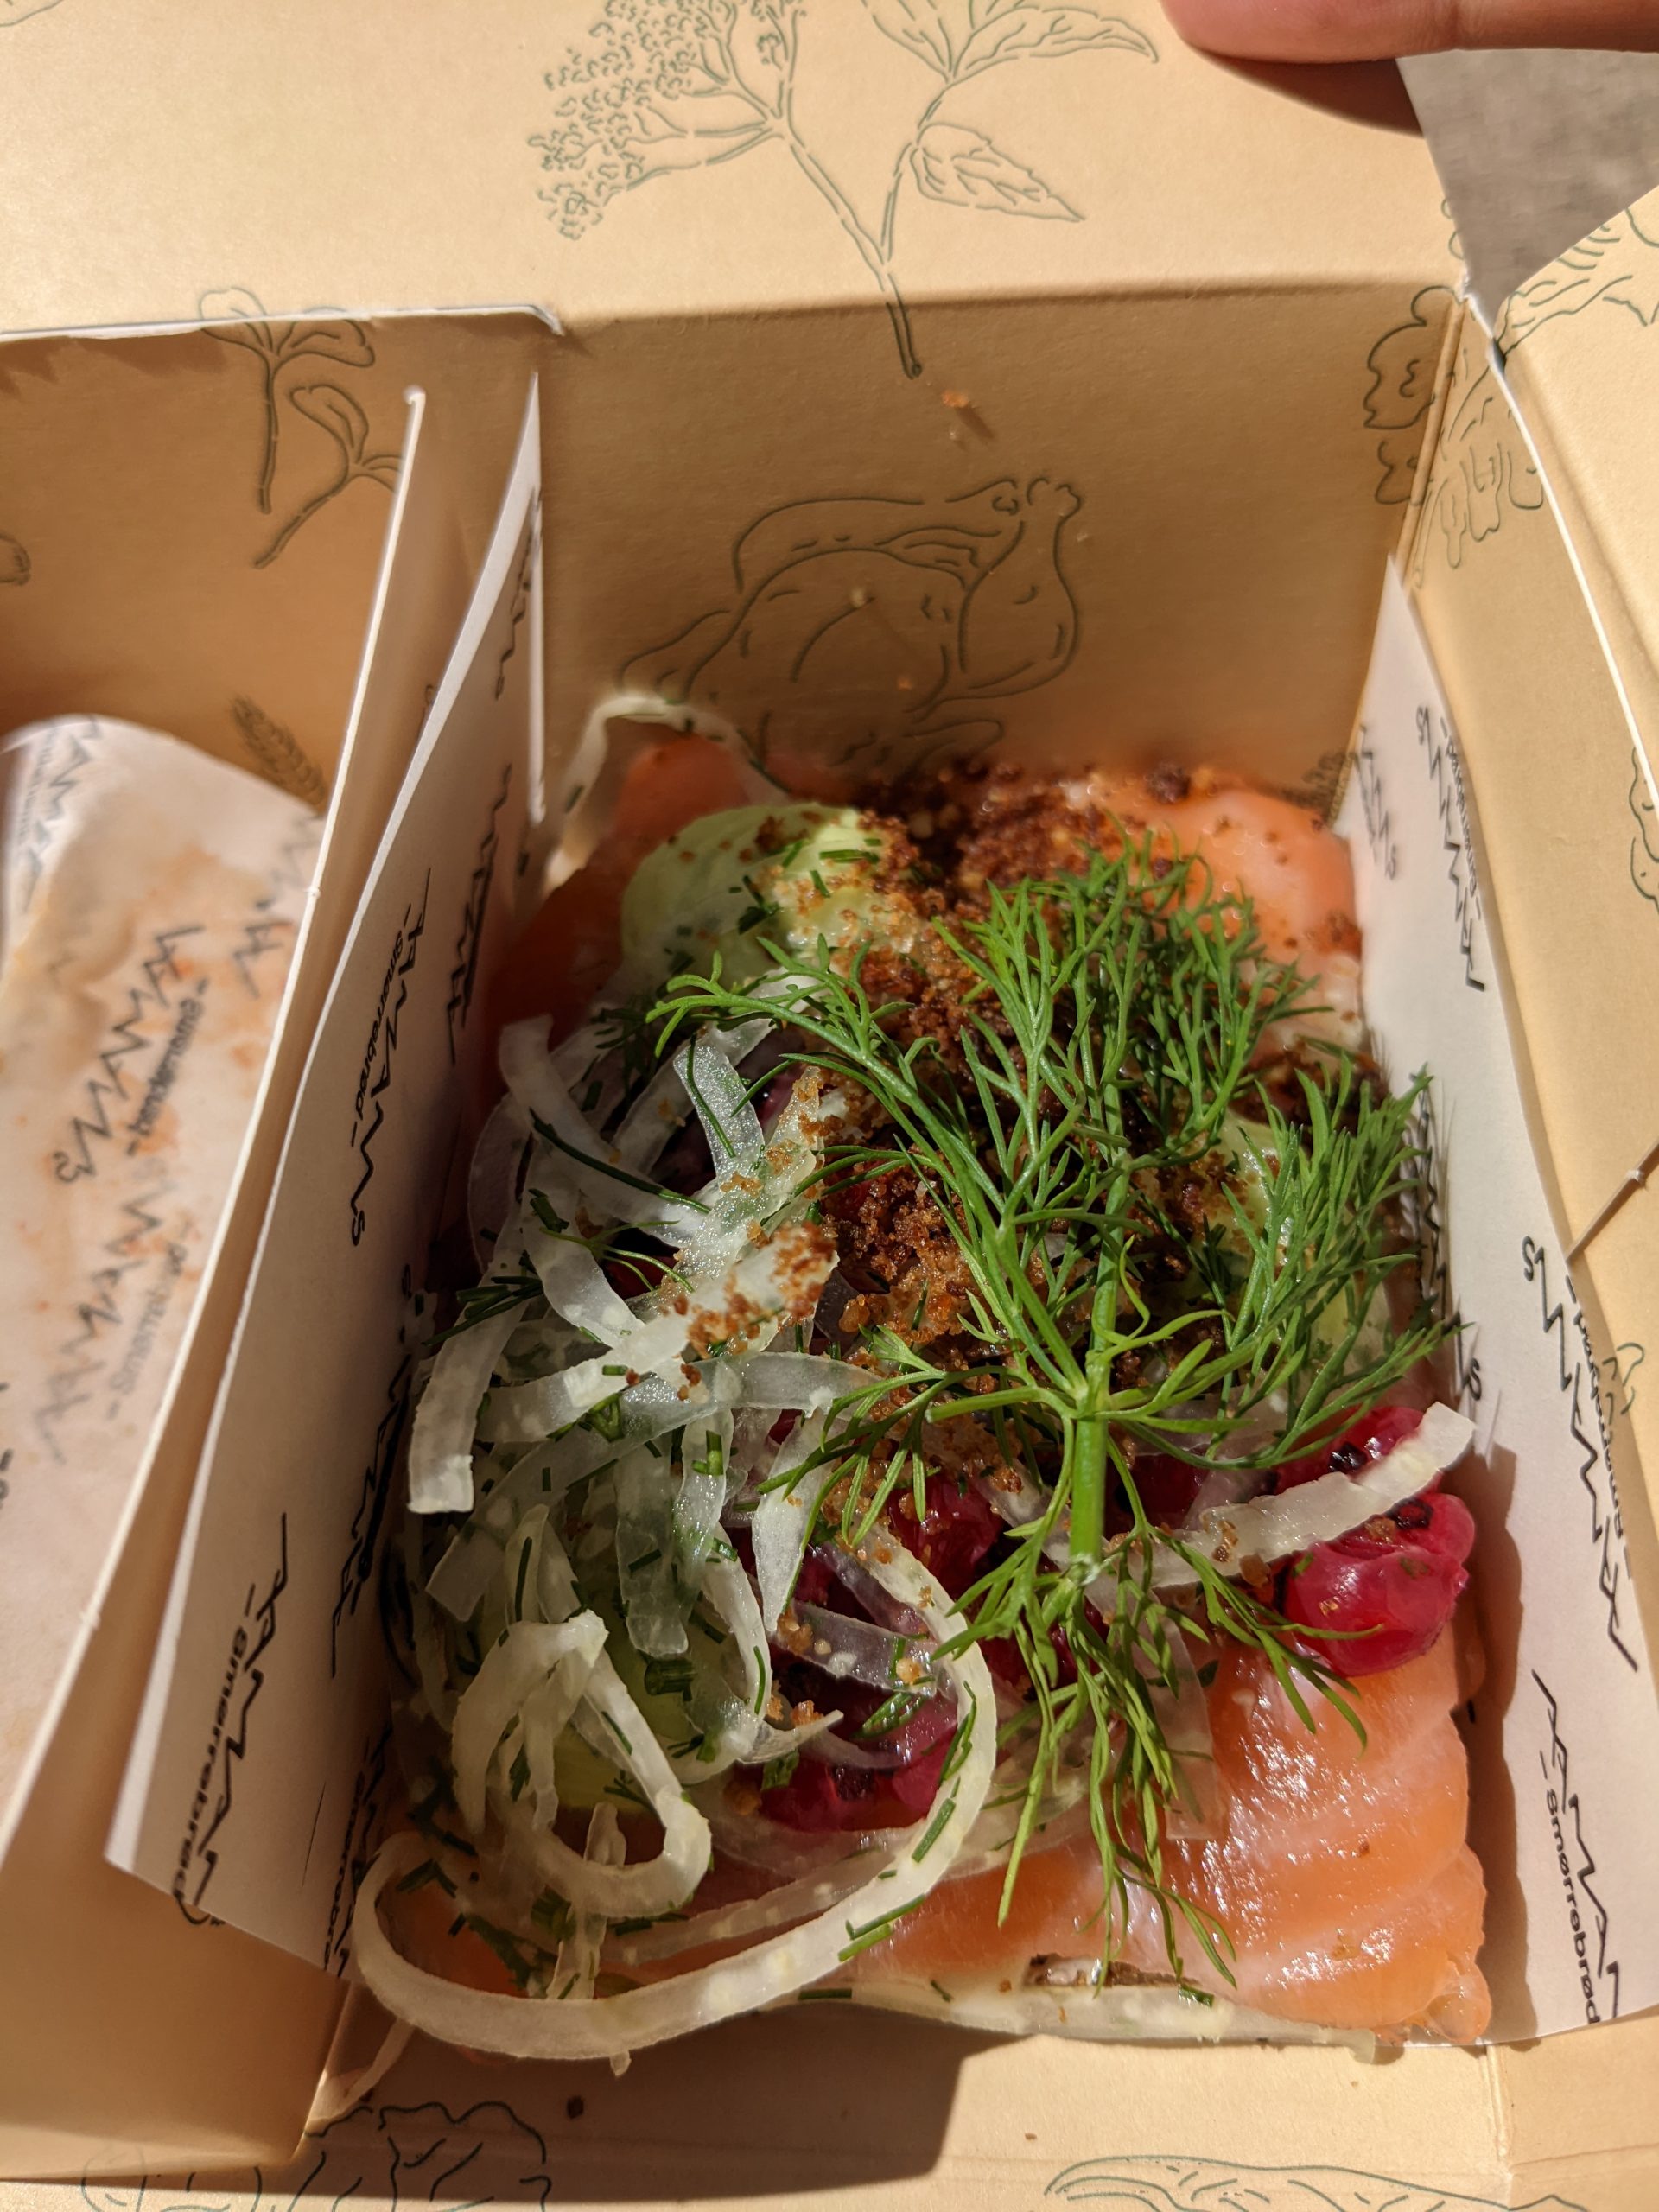 A box holding smoked salmon, with onions,, dill and lingonberries on top